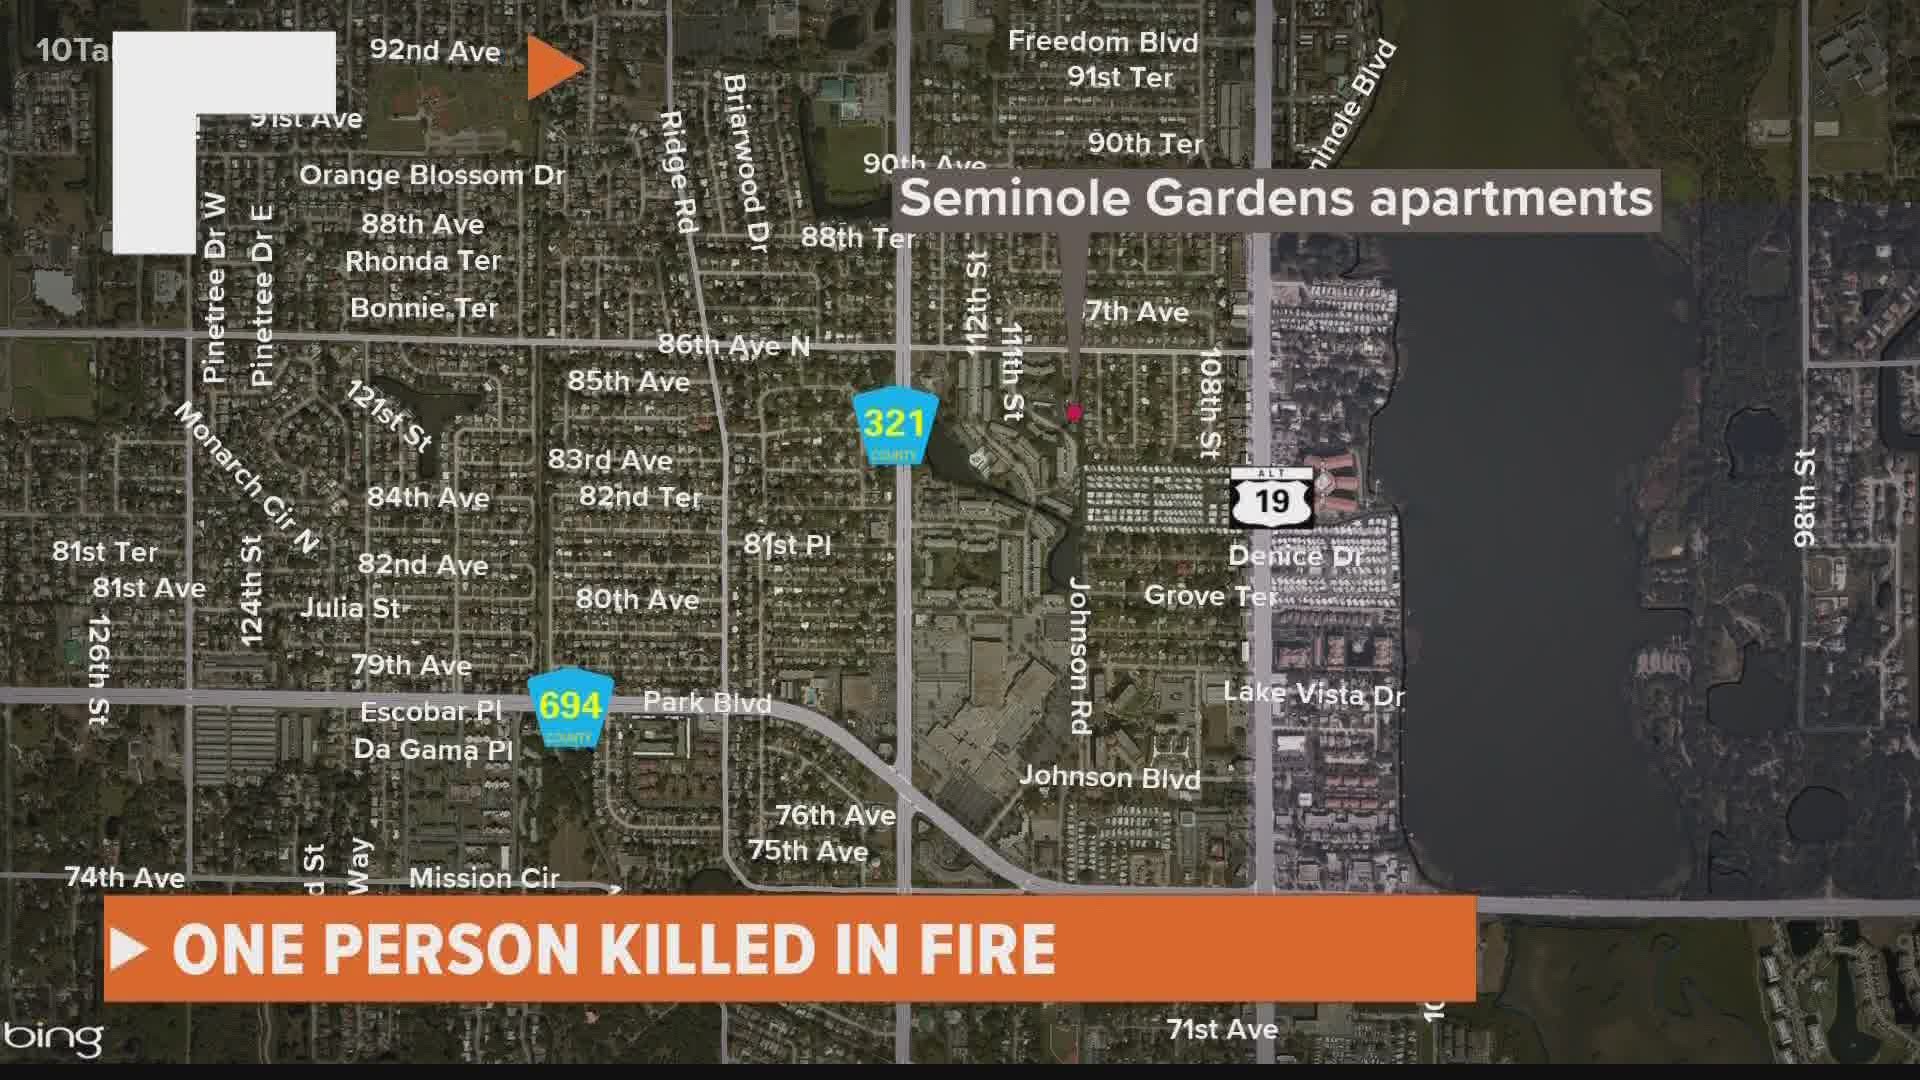 The sheriff's office said the call came in around 4 a.m. at the Seminole Gardens Apartments.